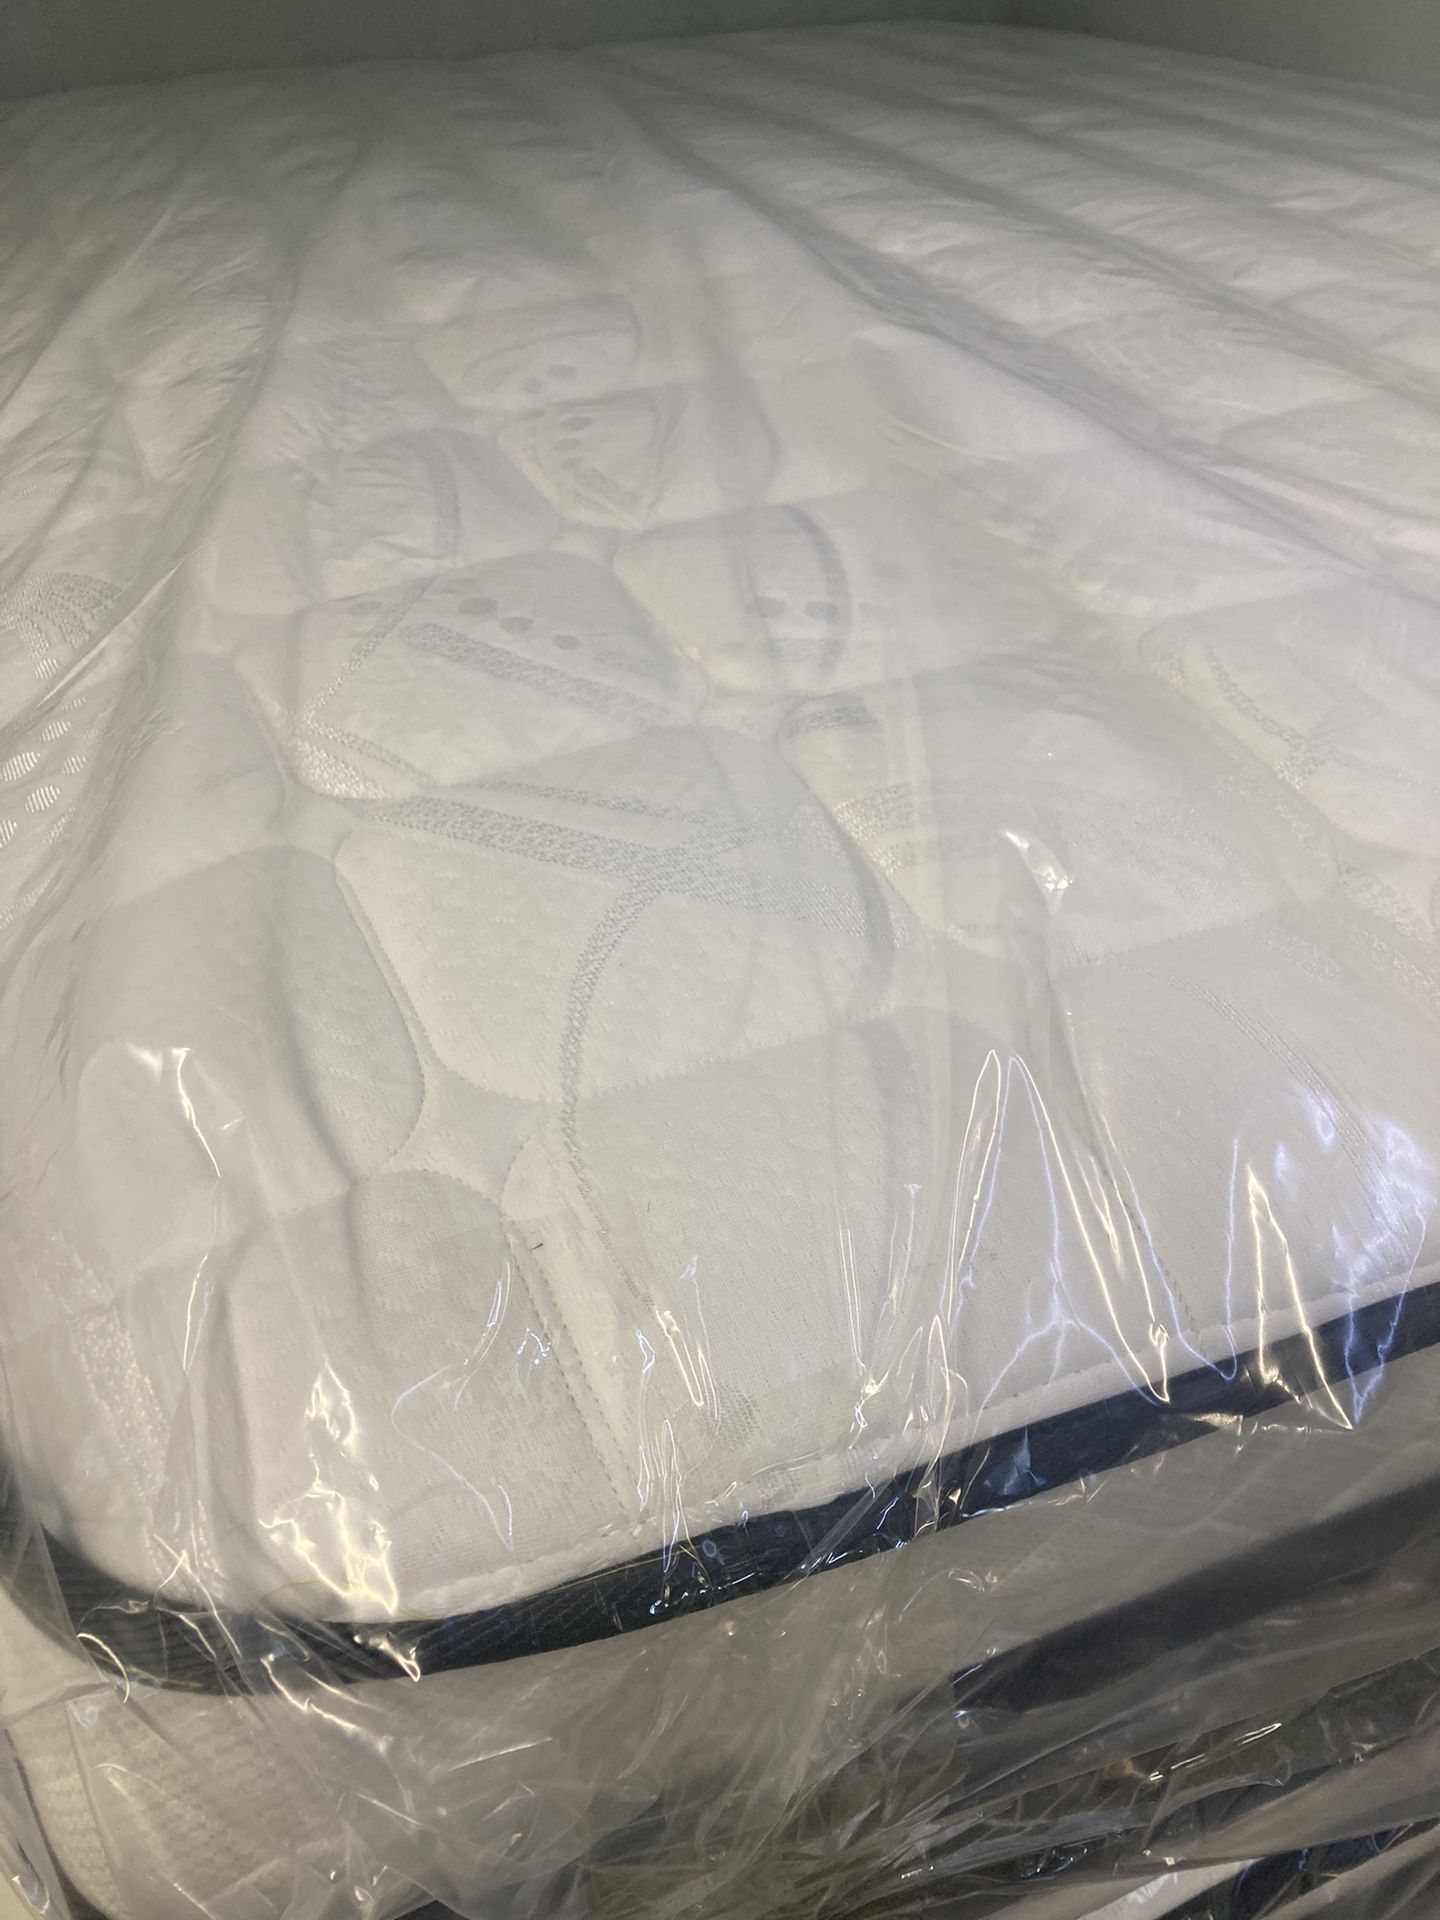 New King Size Pillow Top 